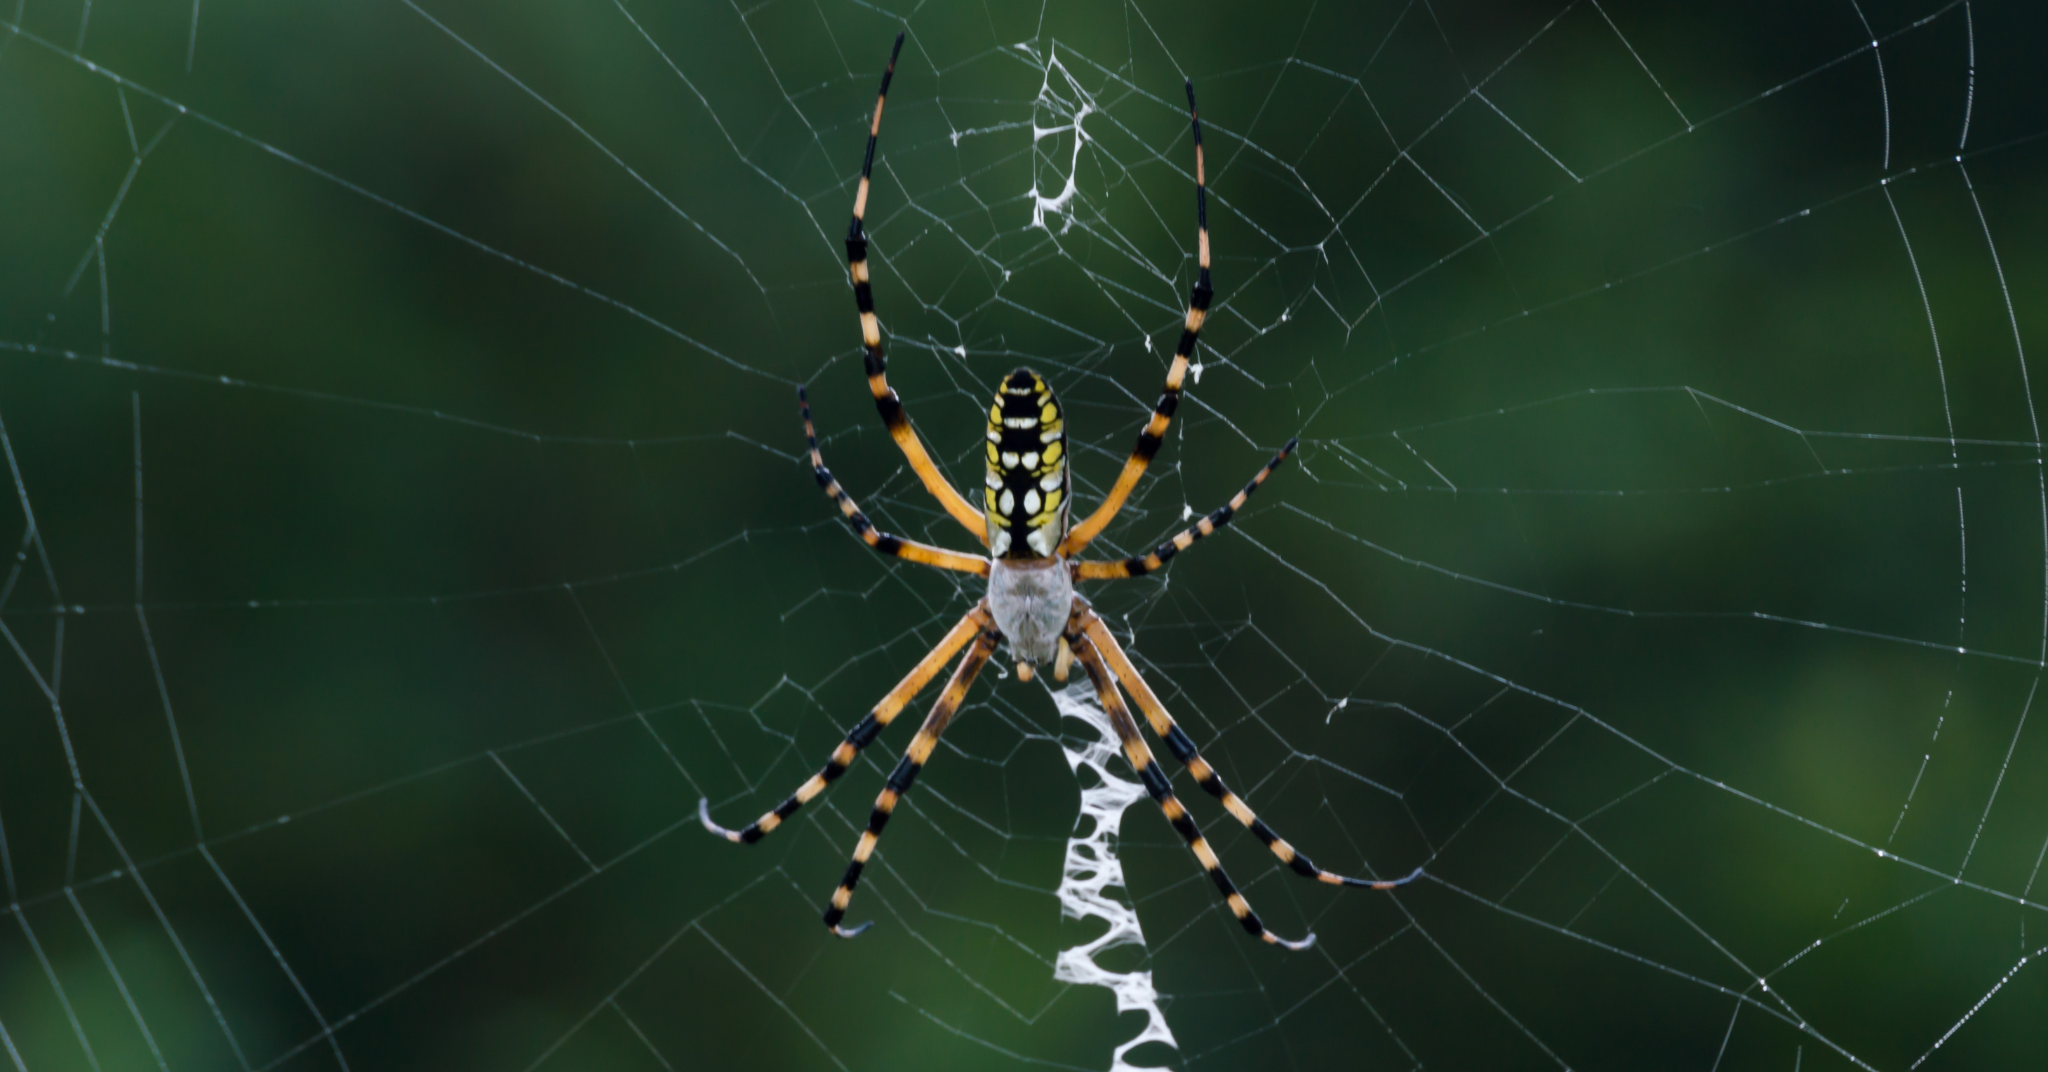 What Is a Banana Spider?